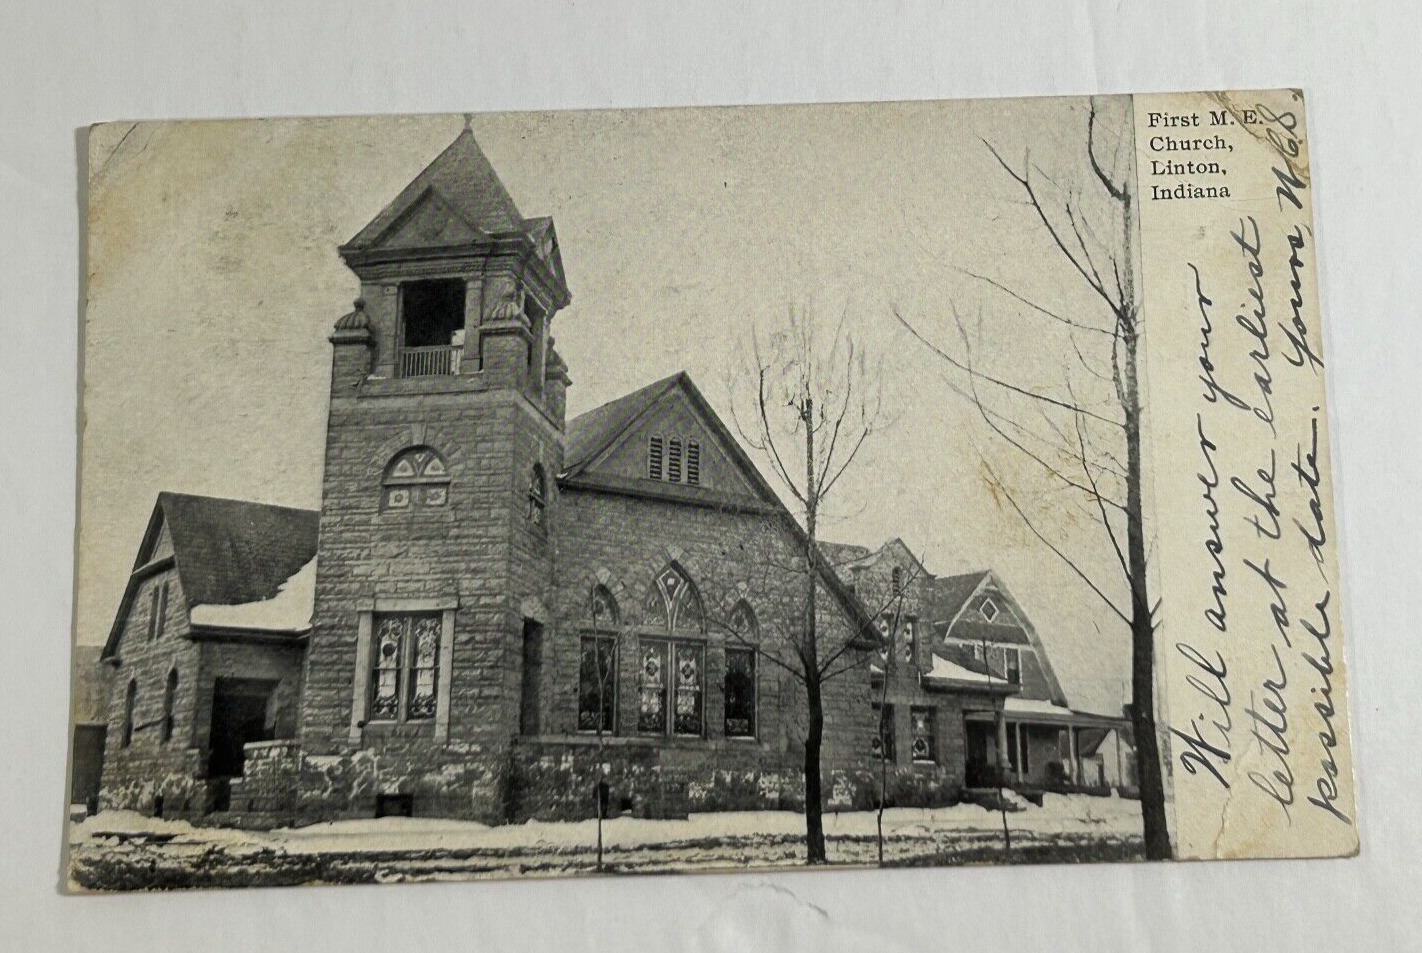 Postcard - Linton Indiana IN First M.E. Church  Posted 1907